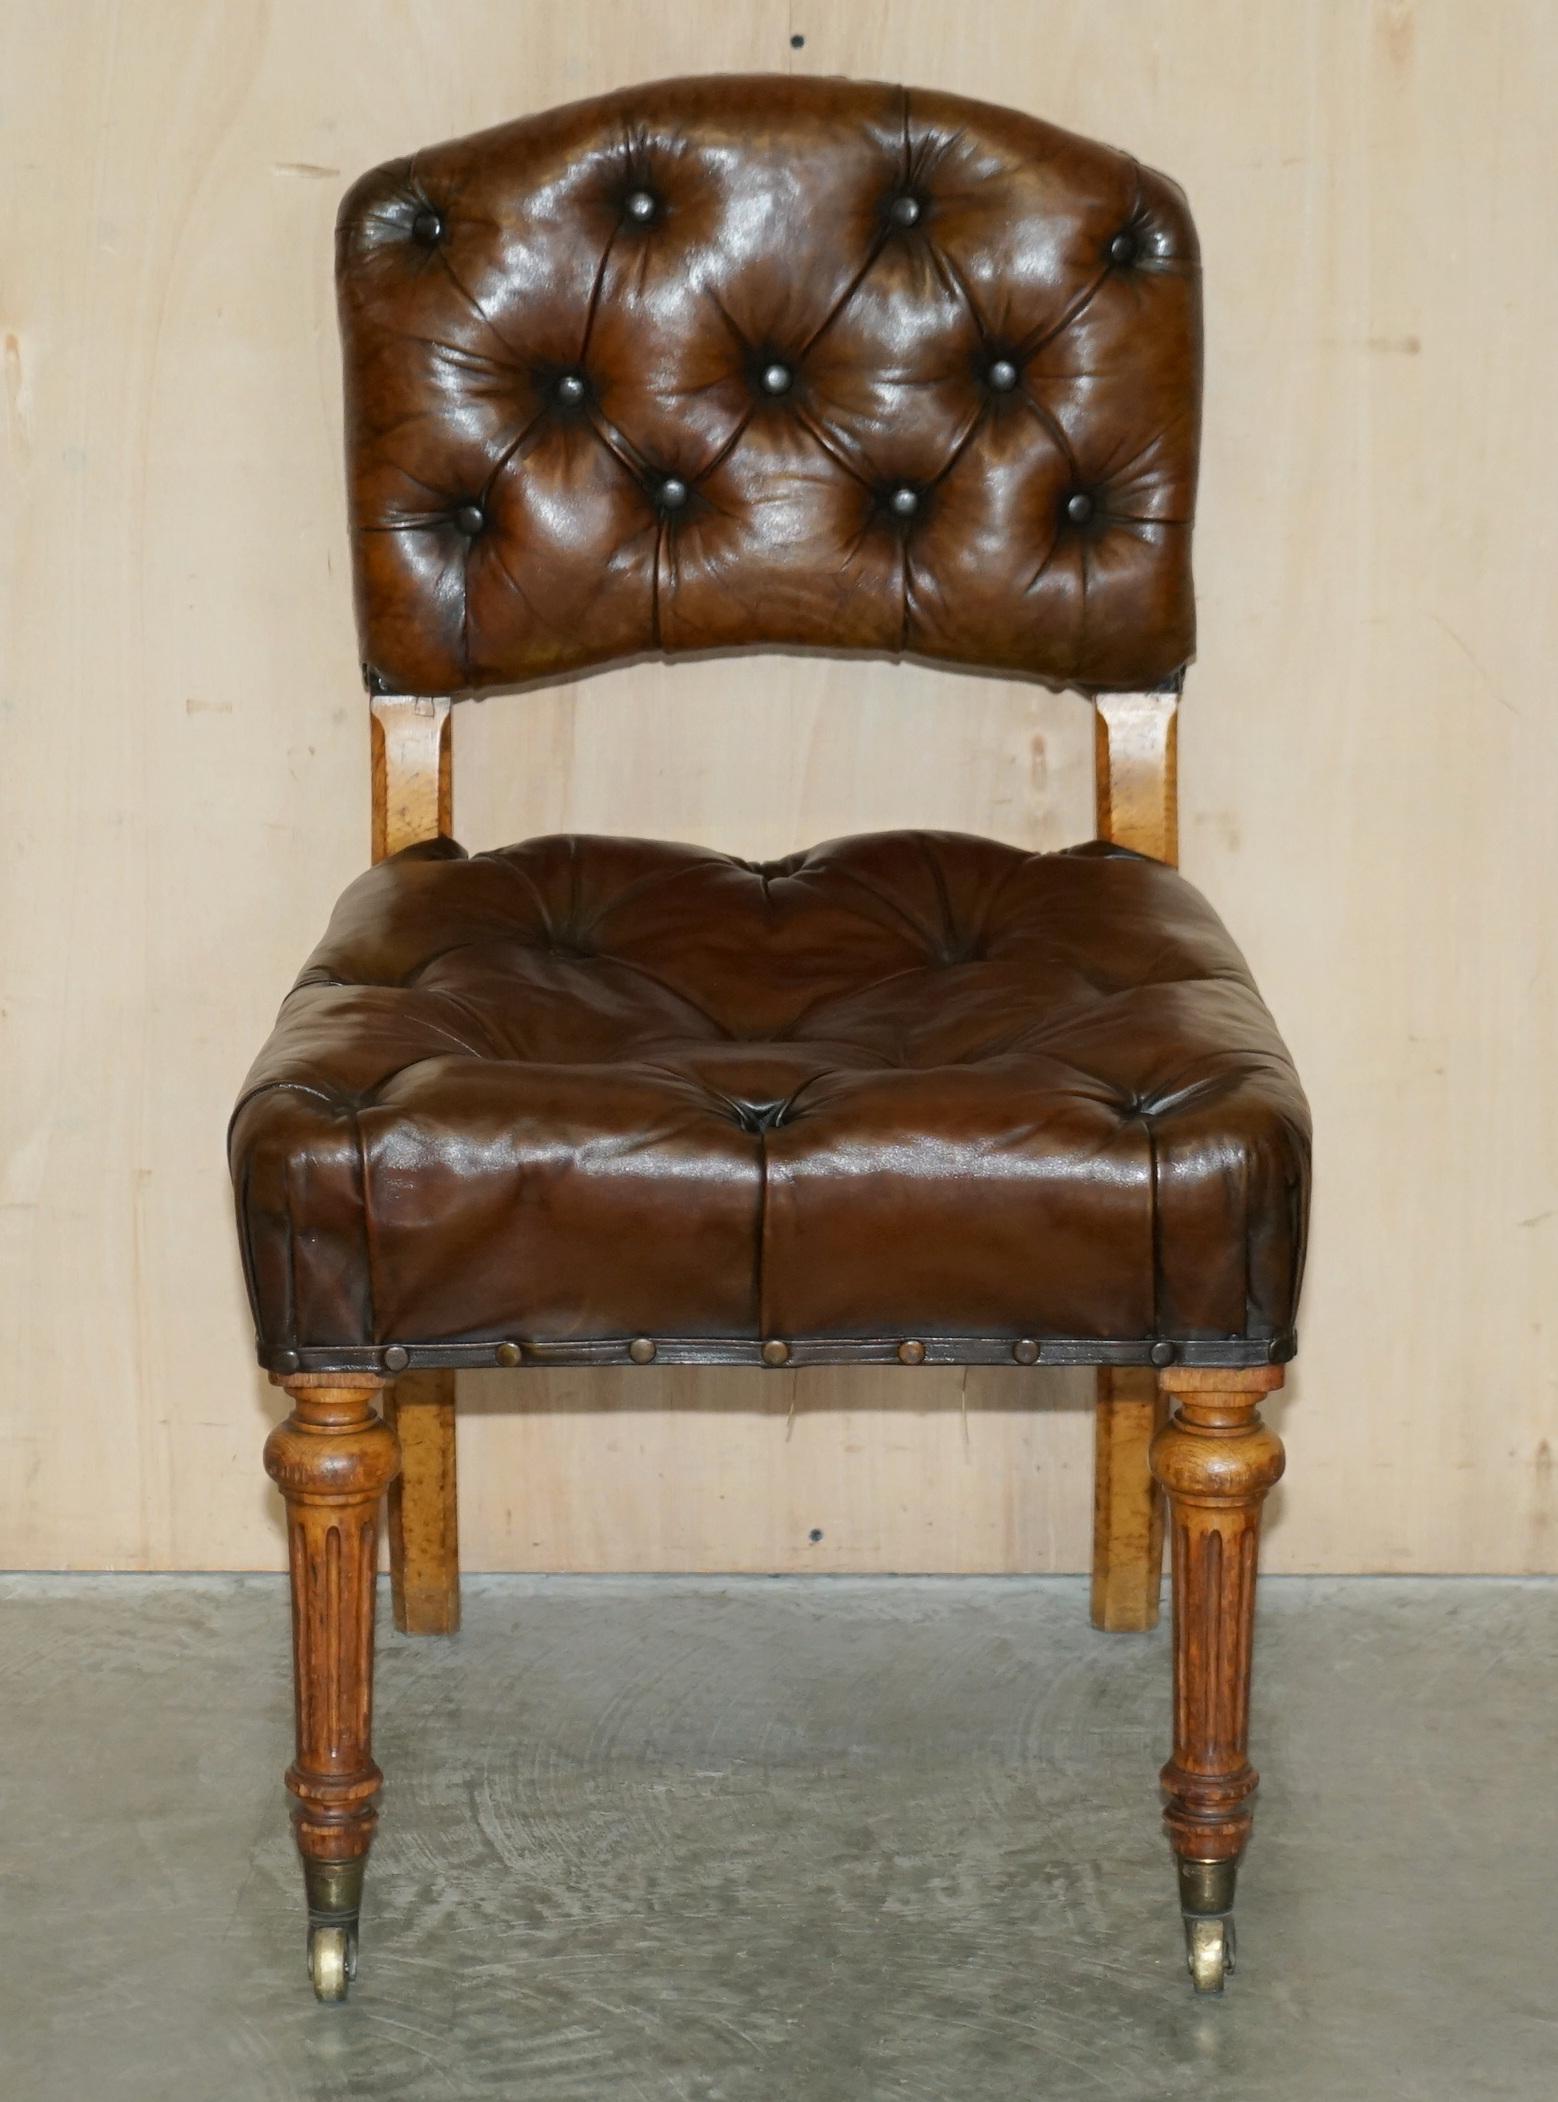 We are delighted to offer for sale this very rare fully restored Victorian Chesterfield brown leather office desk chair with Pollard oak frame and original horse hair padding.

This is a very important and substantial chair, it has been fully